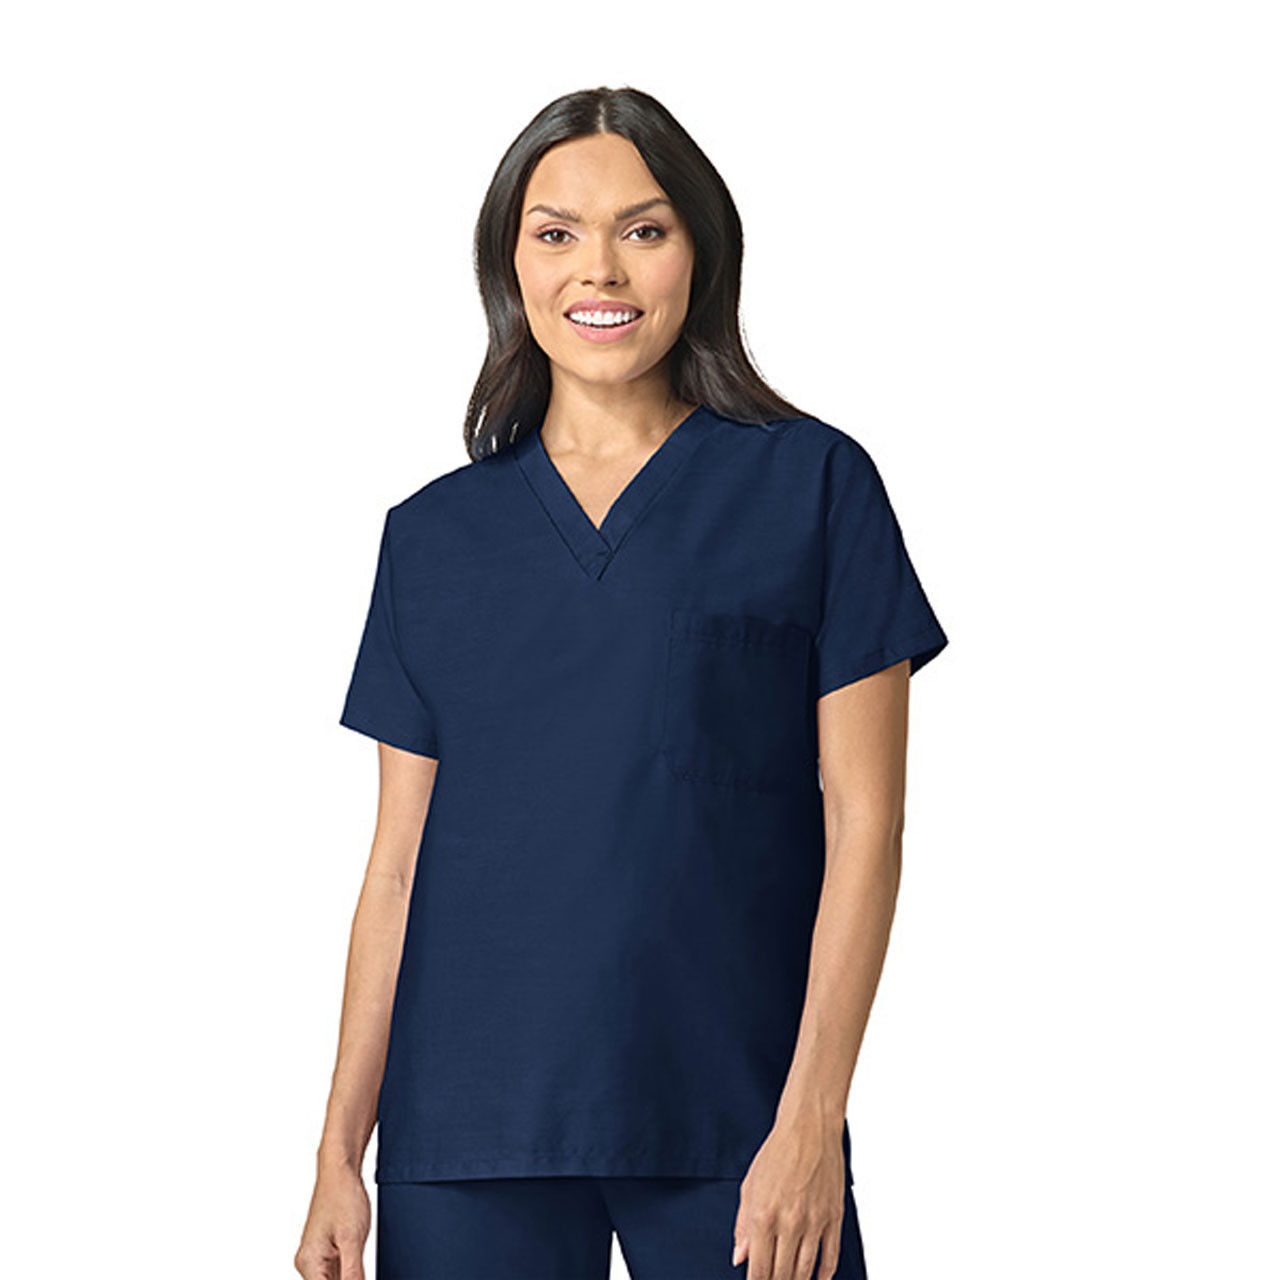 Is the V Neck Scrub Top durable?